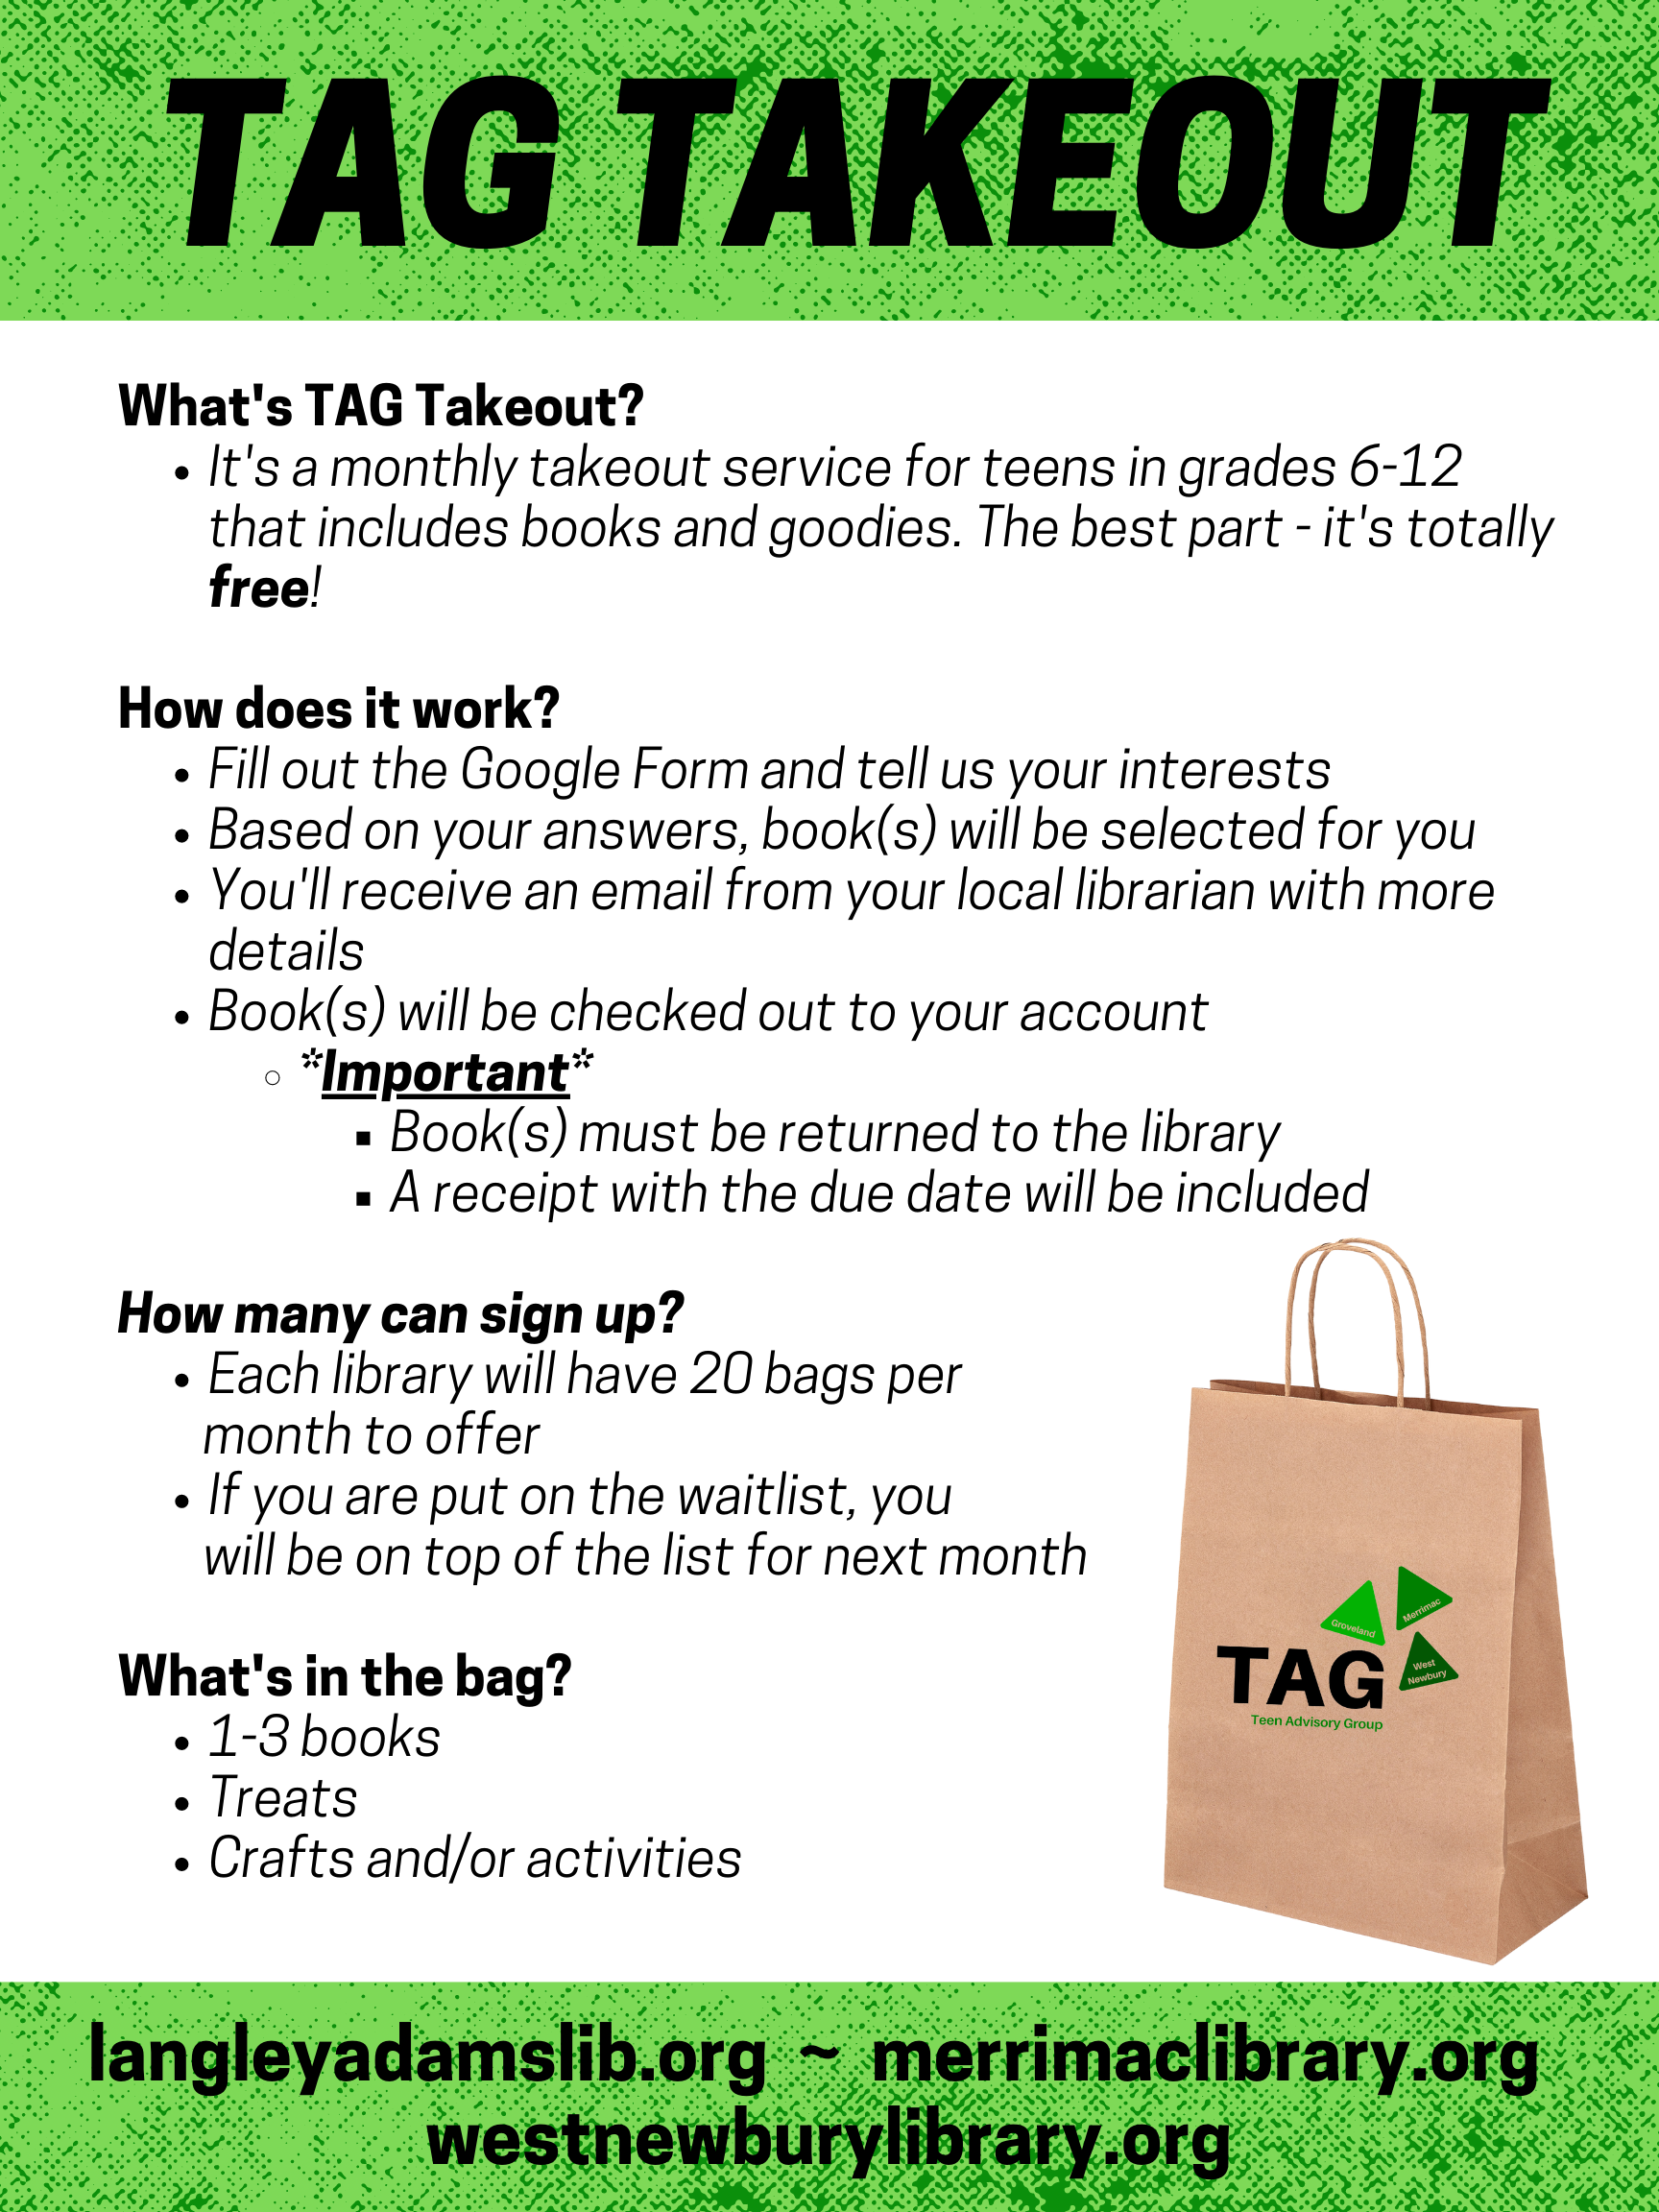 It's a monthly takeout service for teens in grades 7-12 that includes books and goodies. The best part - it's totally free!